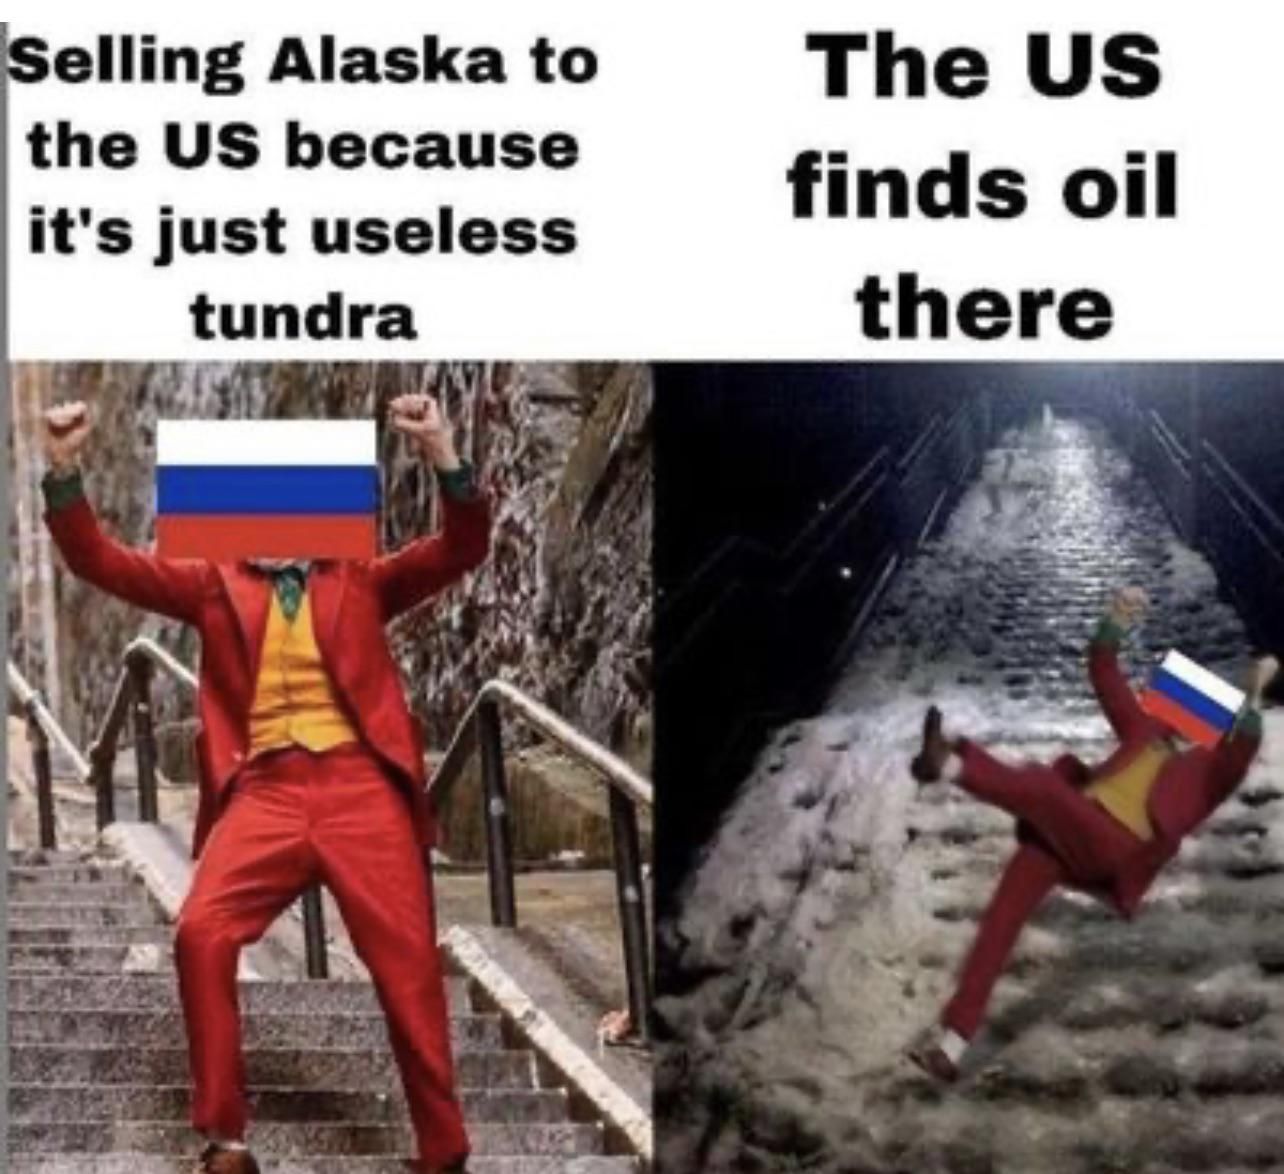 The US can find oil reserves anywhere.